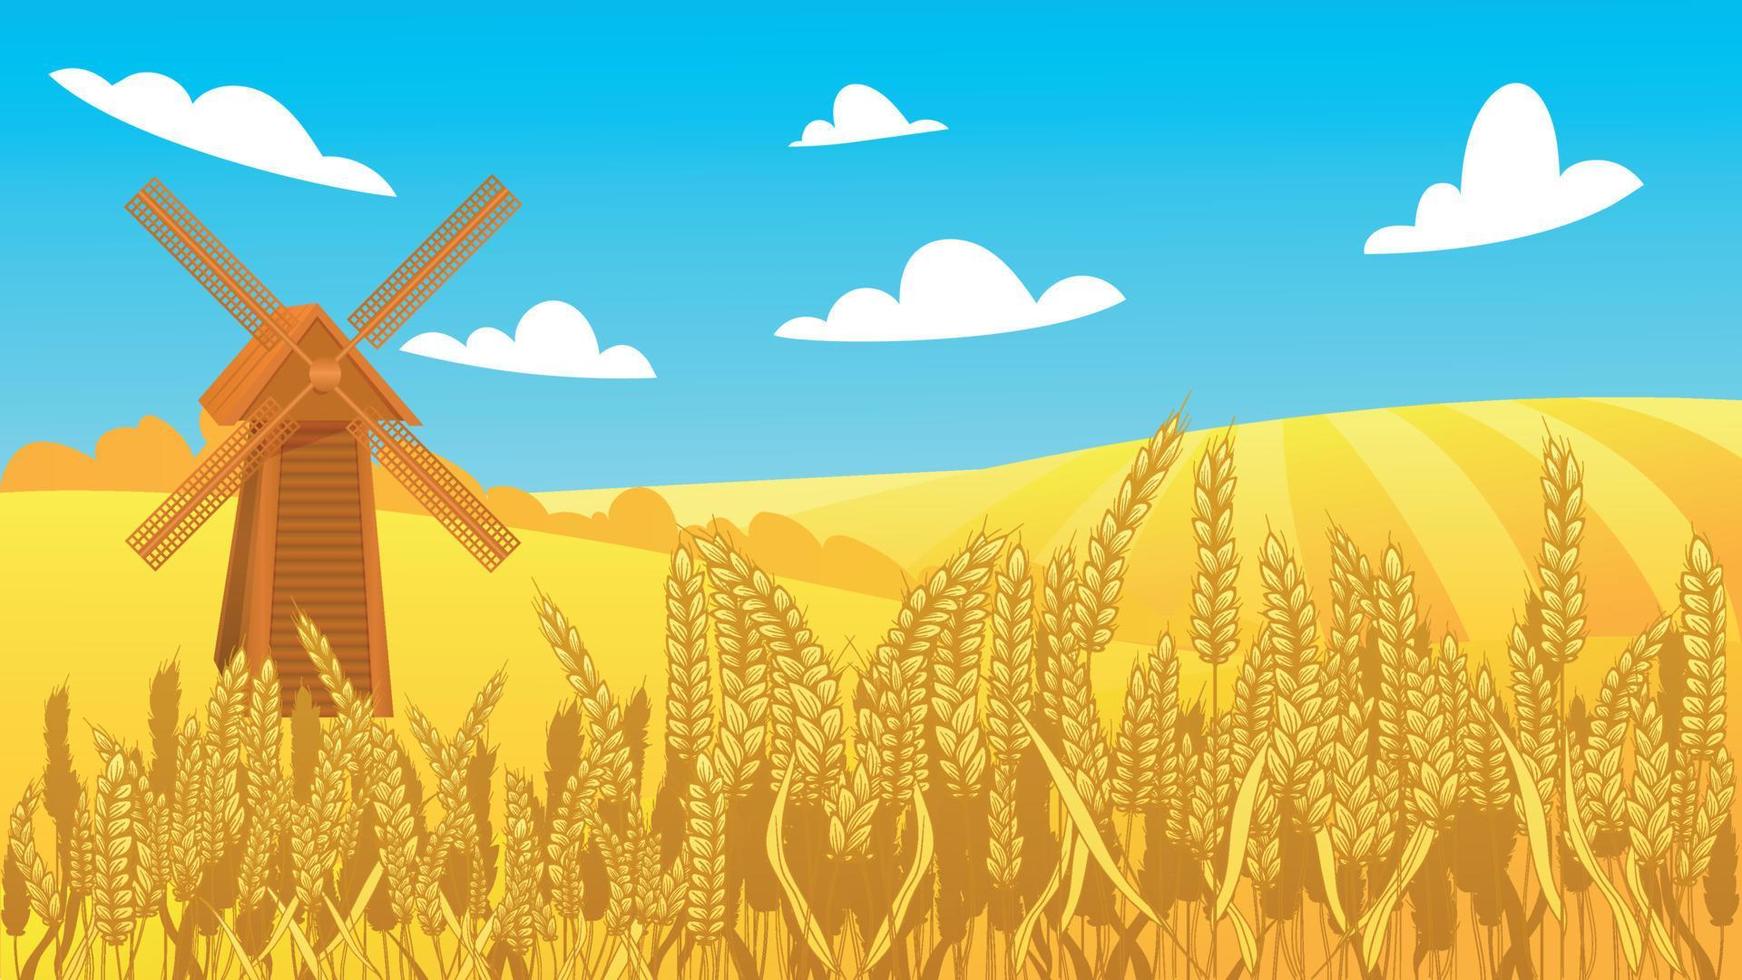 Rural autumn landscape with windmill, blue sky and yellow wheat field with spikelet of rye. vector